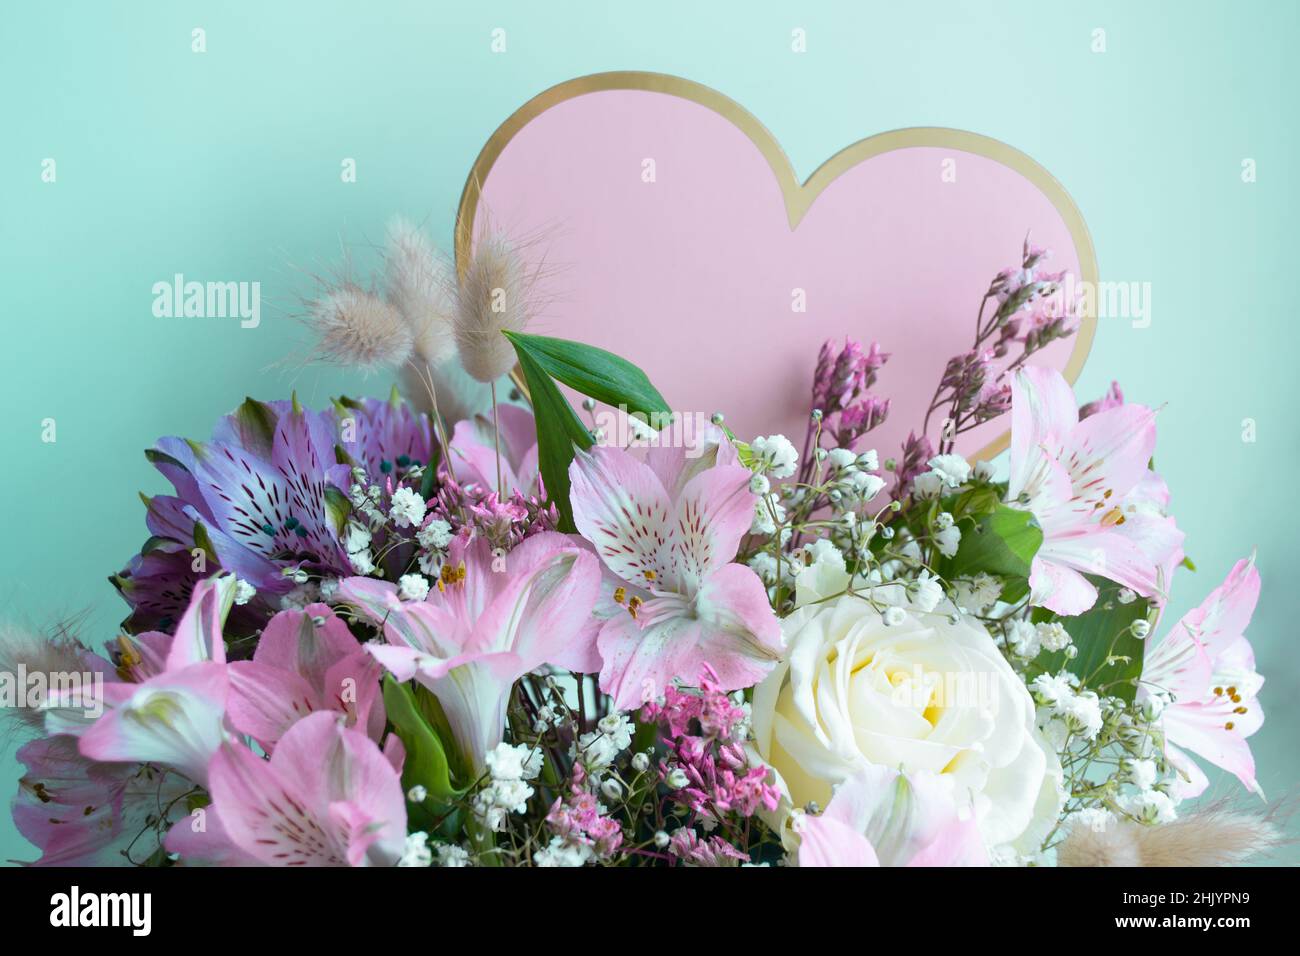 Delicate bouquet pink lilies, white roses, gypsophiles. Turquoise background. Pink Heart, copy space. Stock Photo